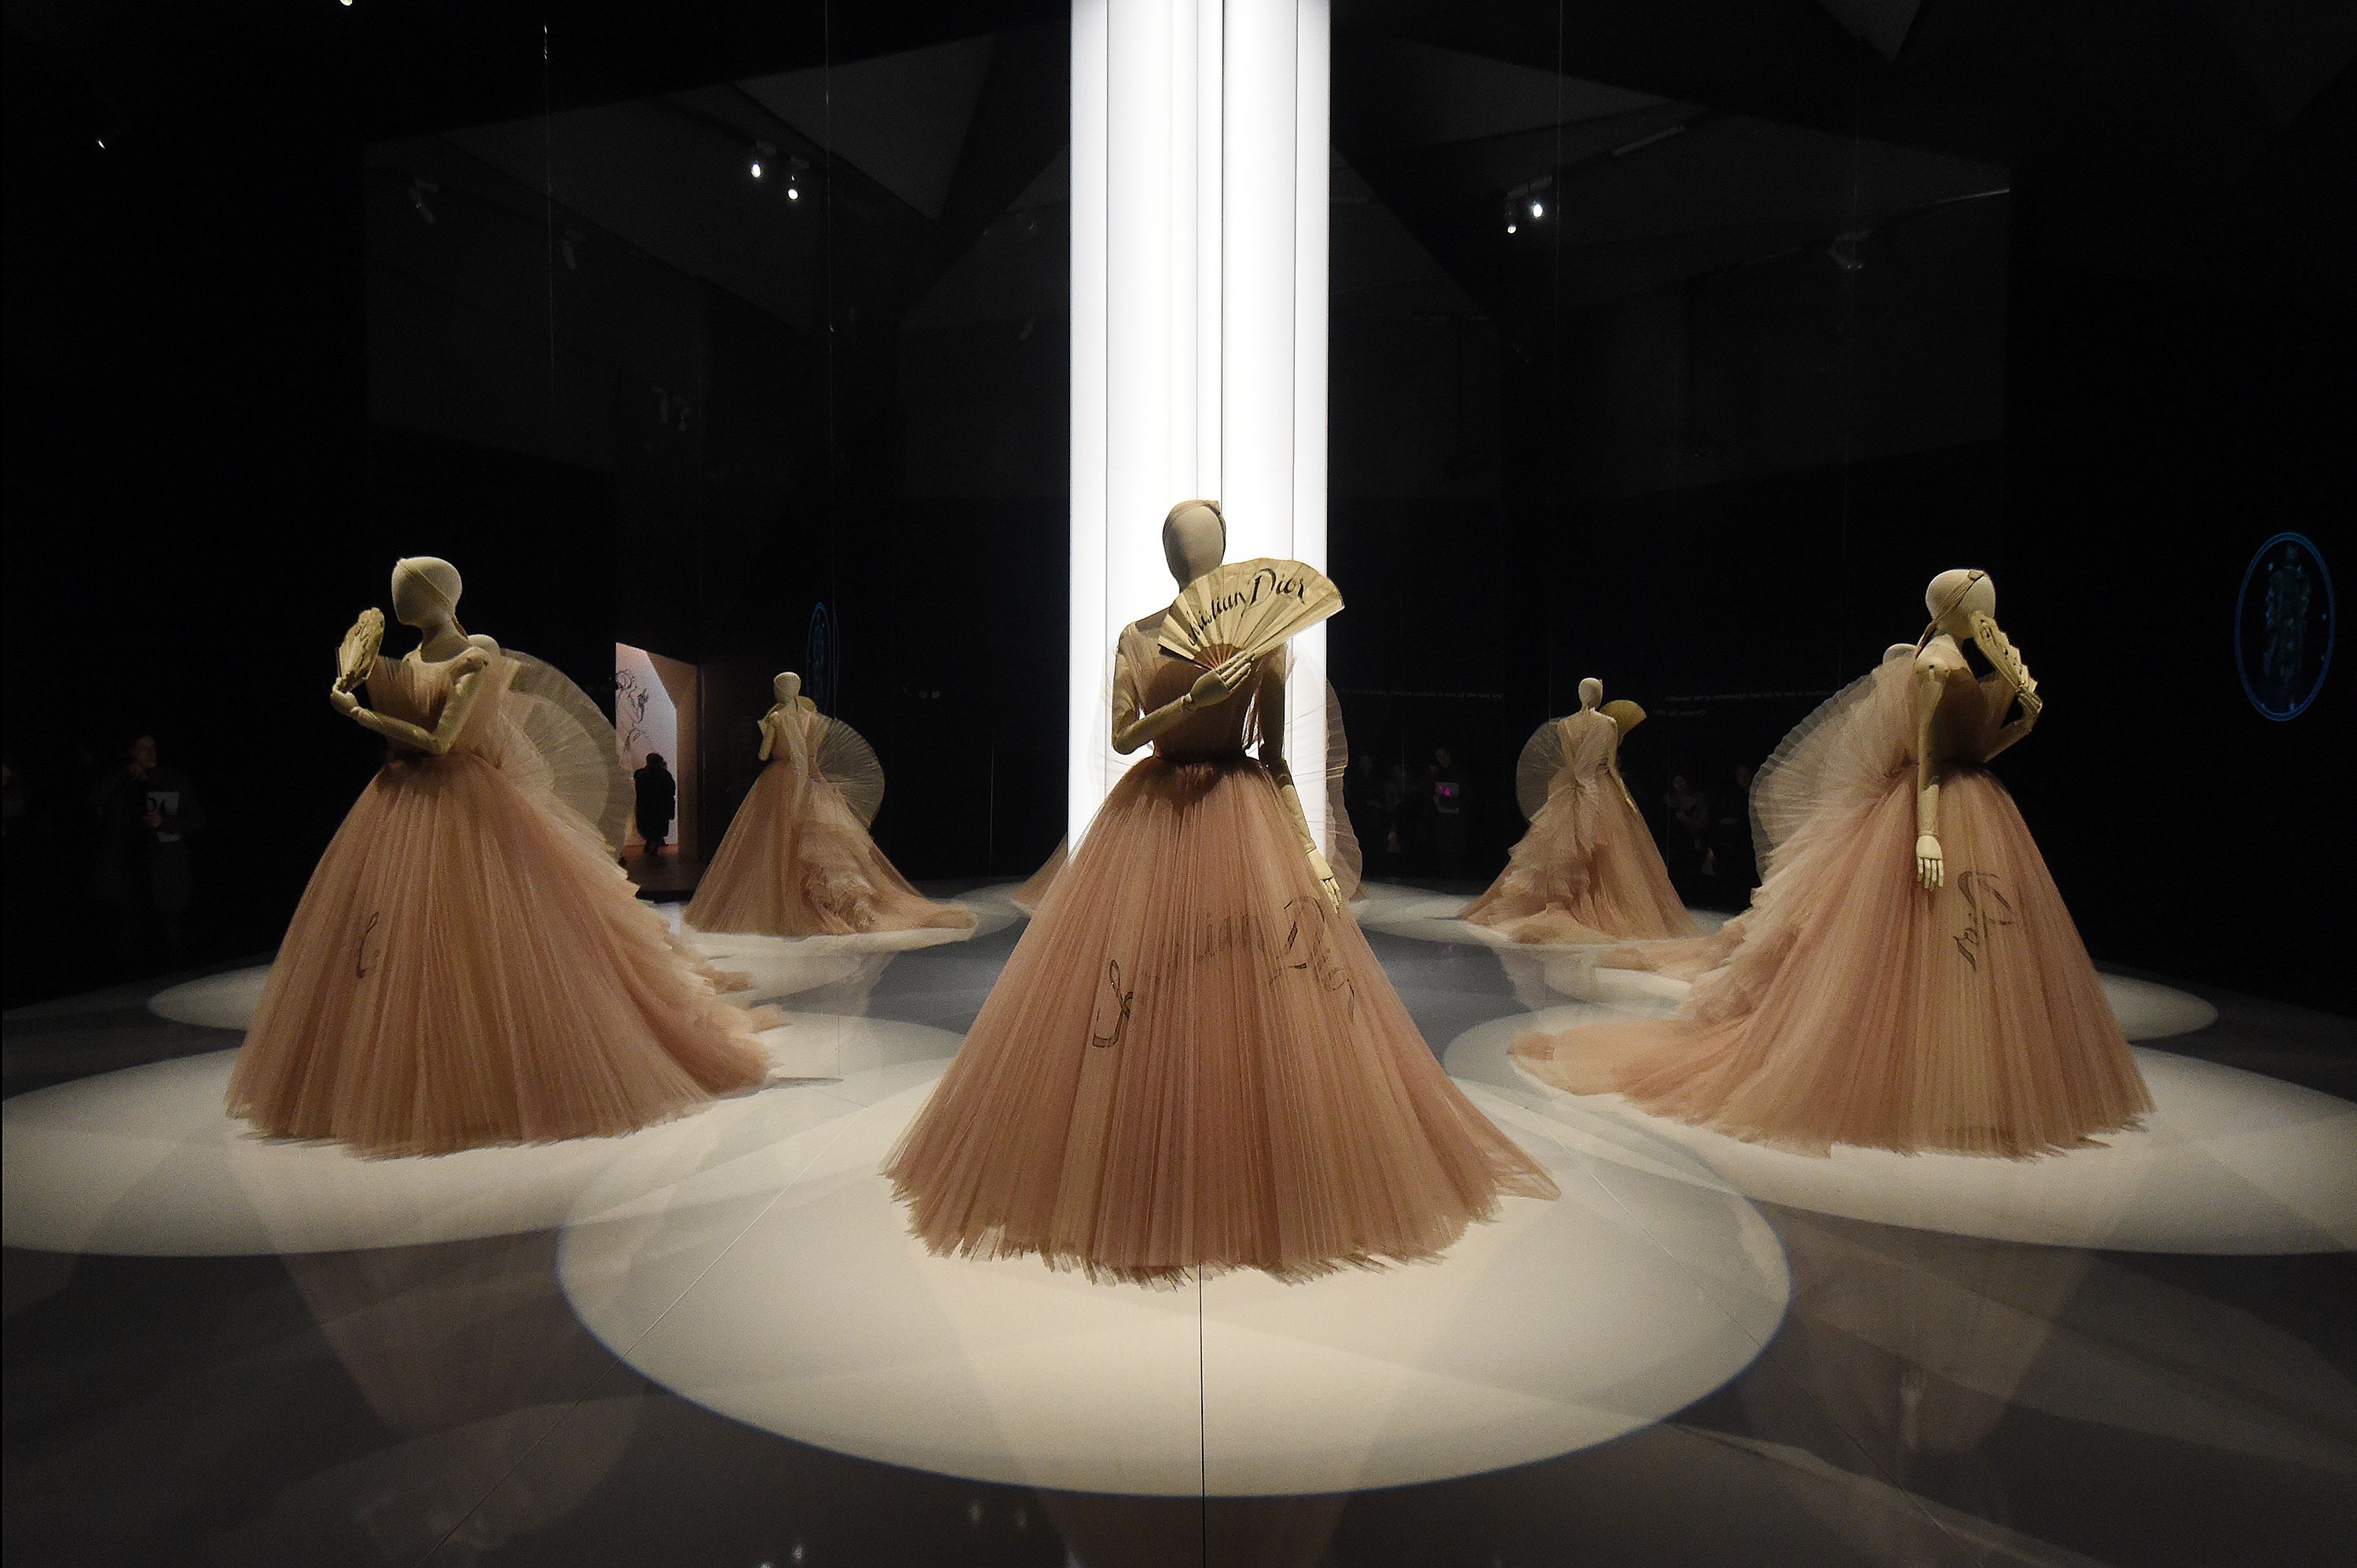 See The Christian Dior Exhibition For Yourself in This Exciting New Book   Between Naps on the Porch